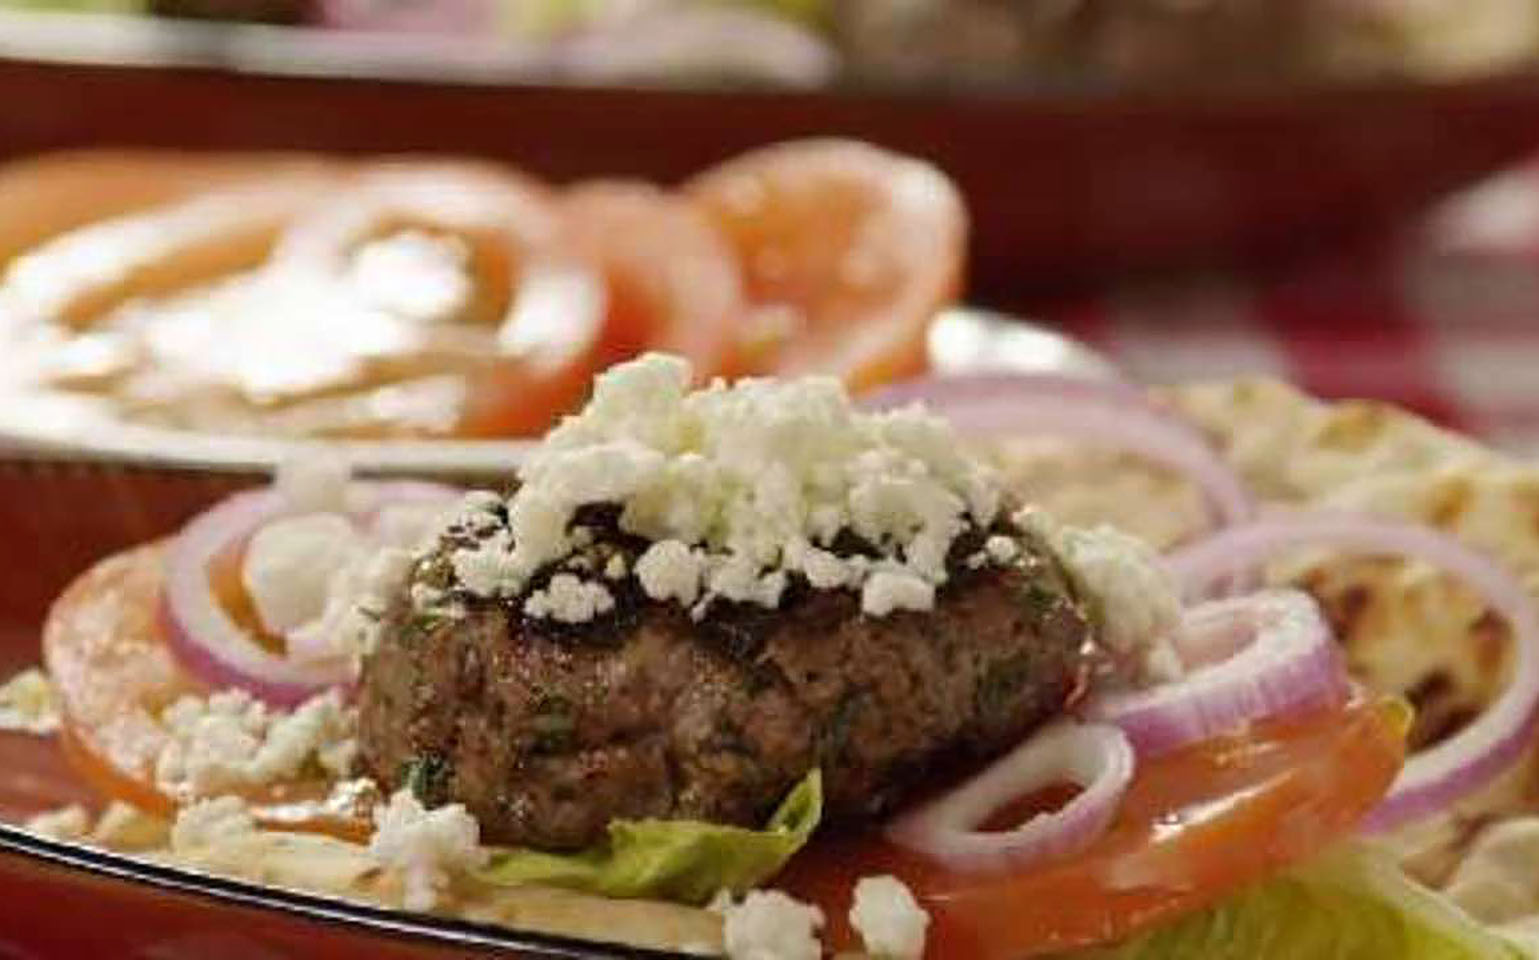 Grilled Spicy Lamb Burgers